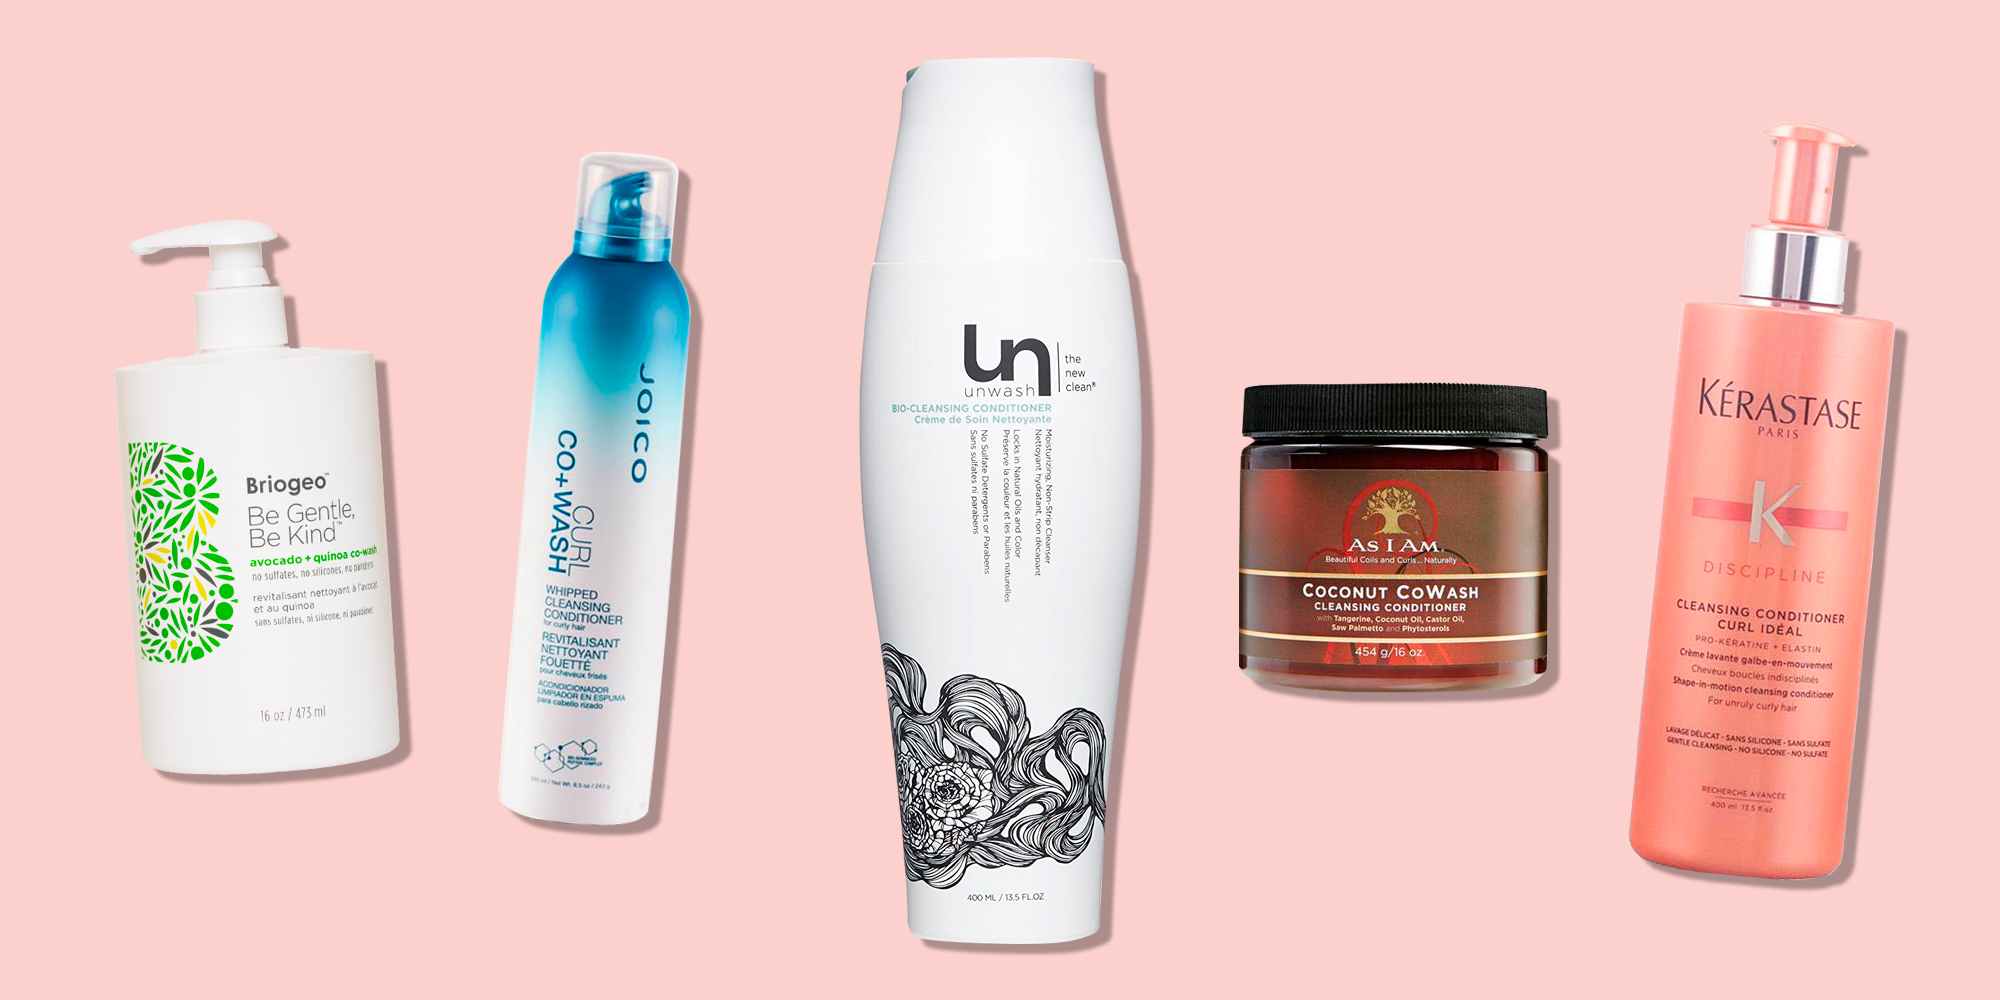 12 Best Cleansing Conditioners - Shampooing Conditioners To Try